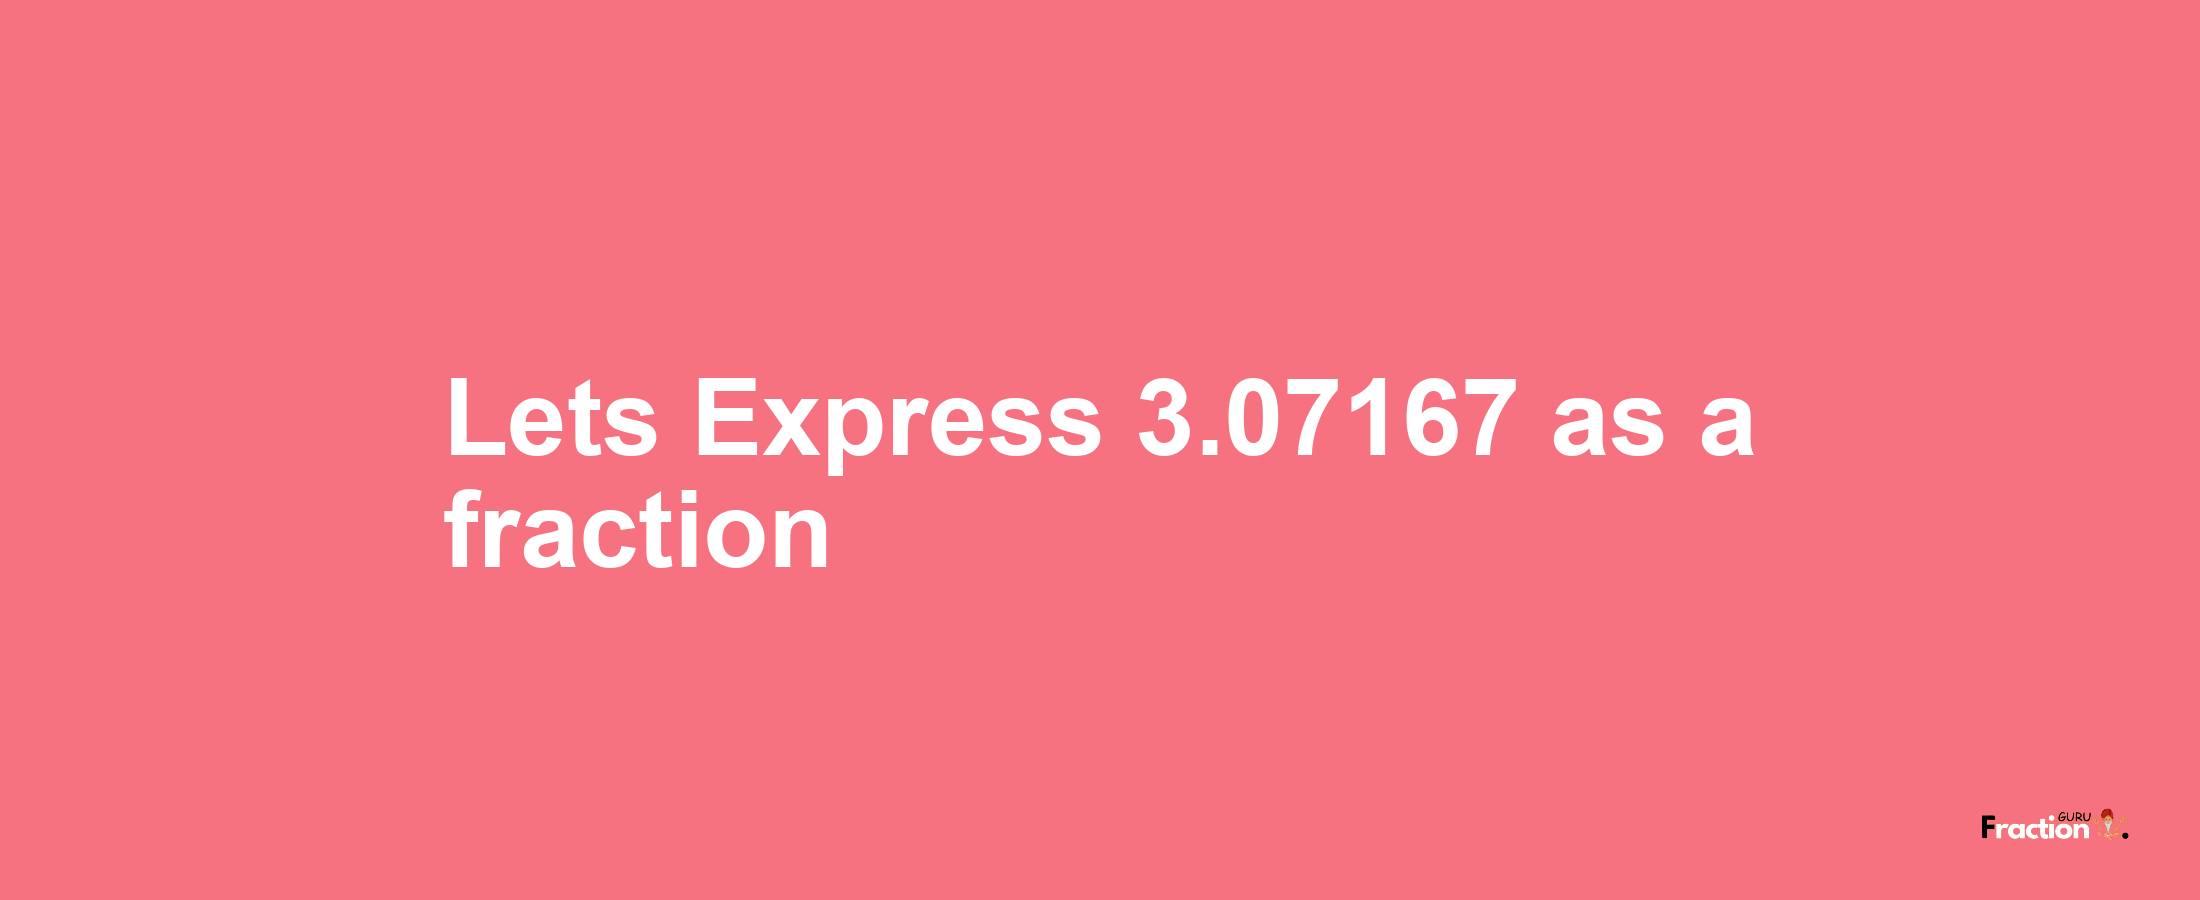 Lets Express 3.07167 as afraction